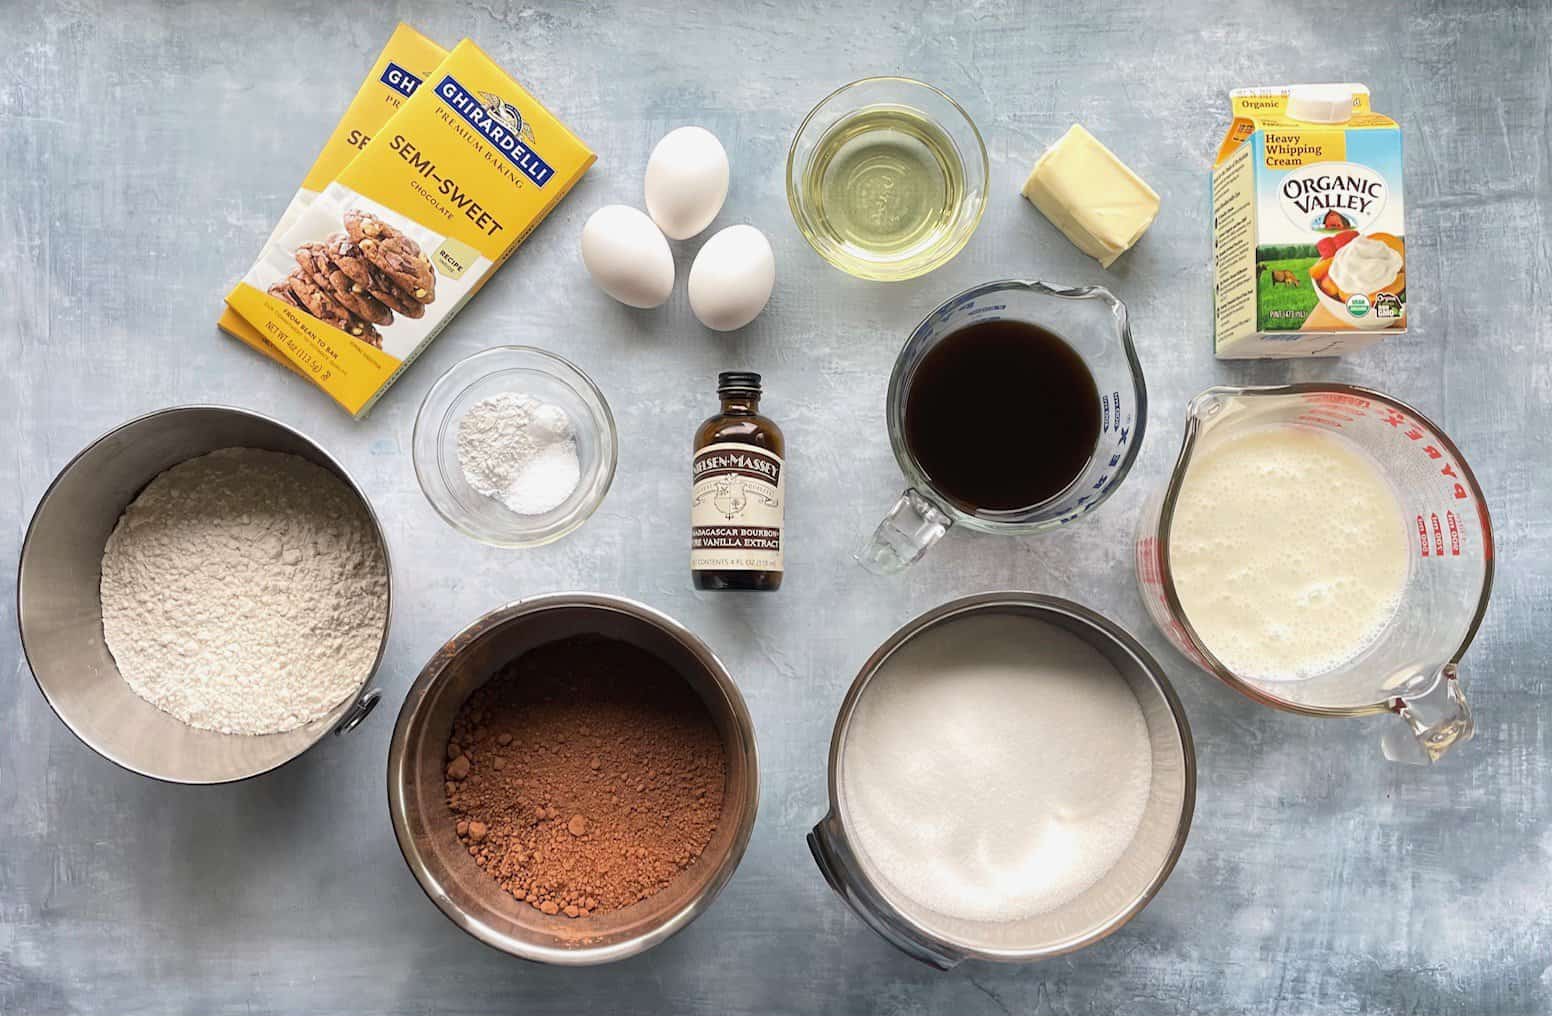 bar chocolate, cocoa, flour, sugar, and other ingredients for a cake and chocolate ganache.